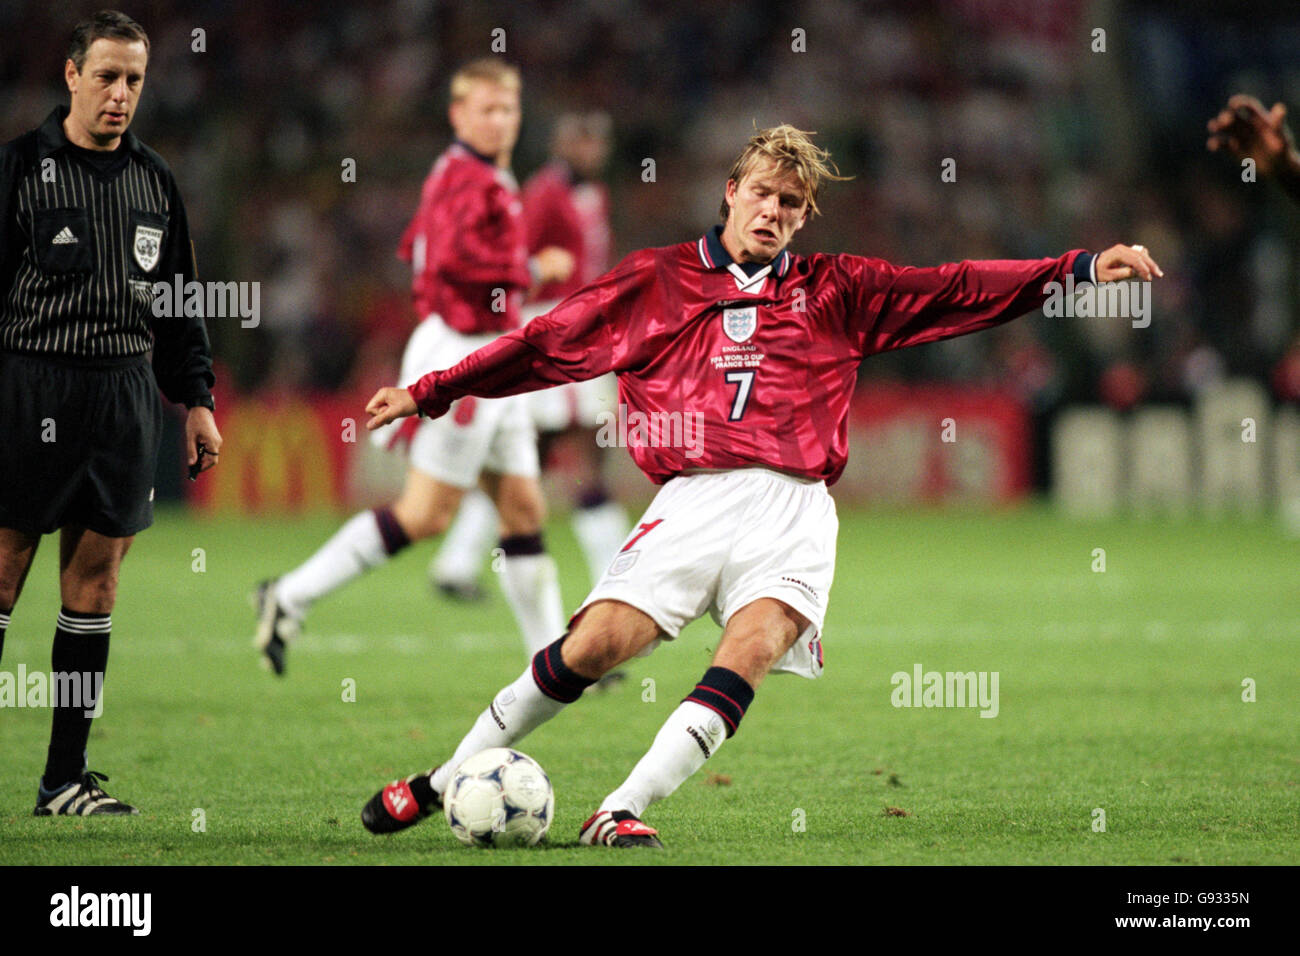 Soccer - World Cup France 98 - Group G - Colombia v England. England's David Beckham during the World Cup Match. Stock Photo